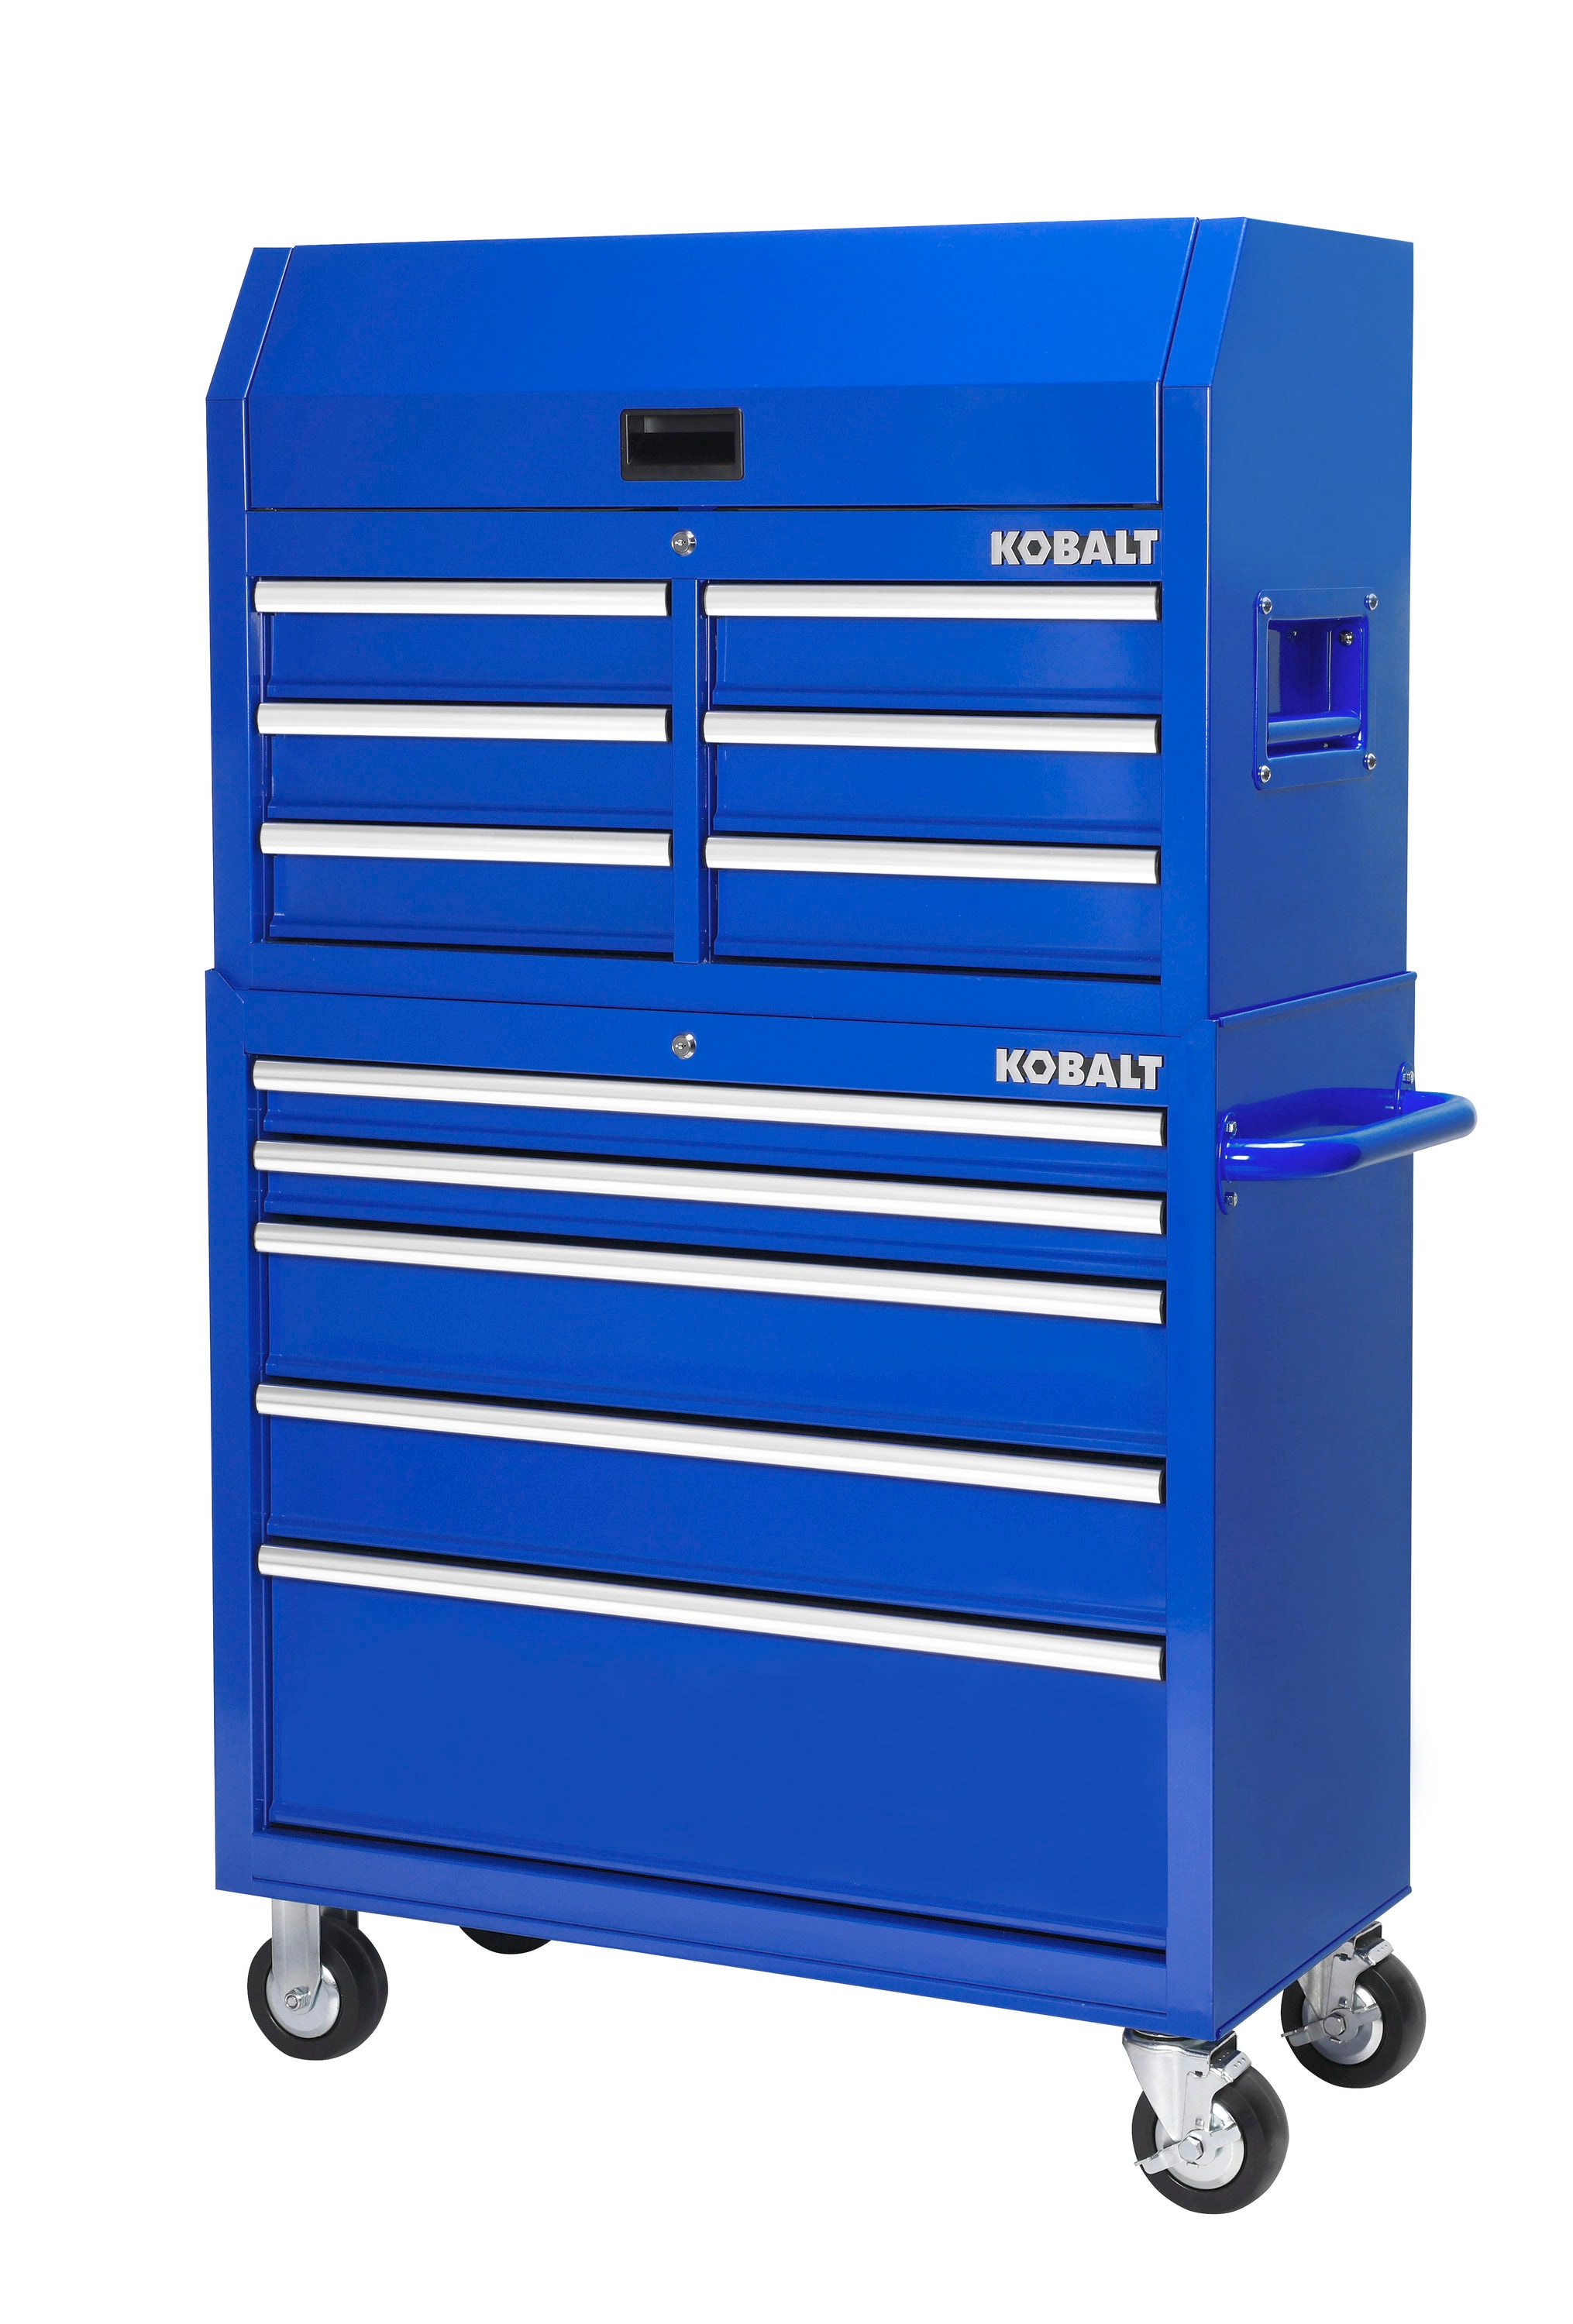 Kobalt Tool Cabinets Review Home Decor